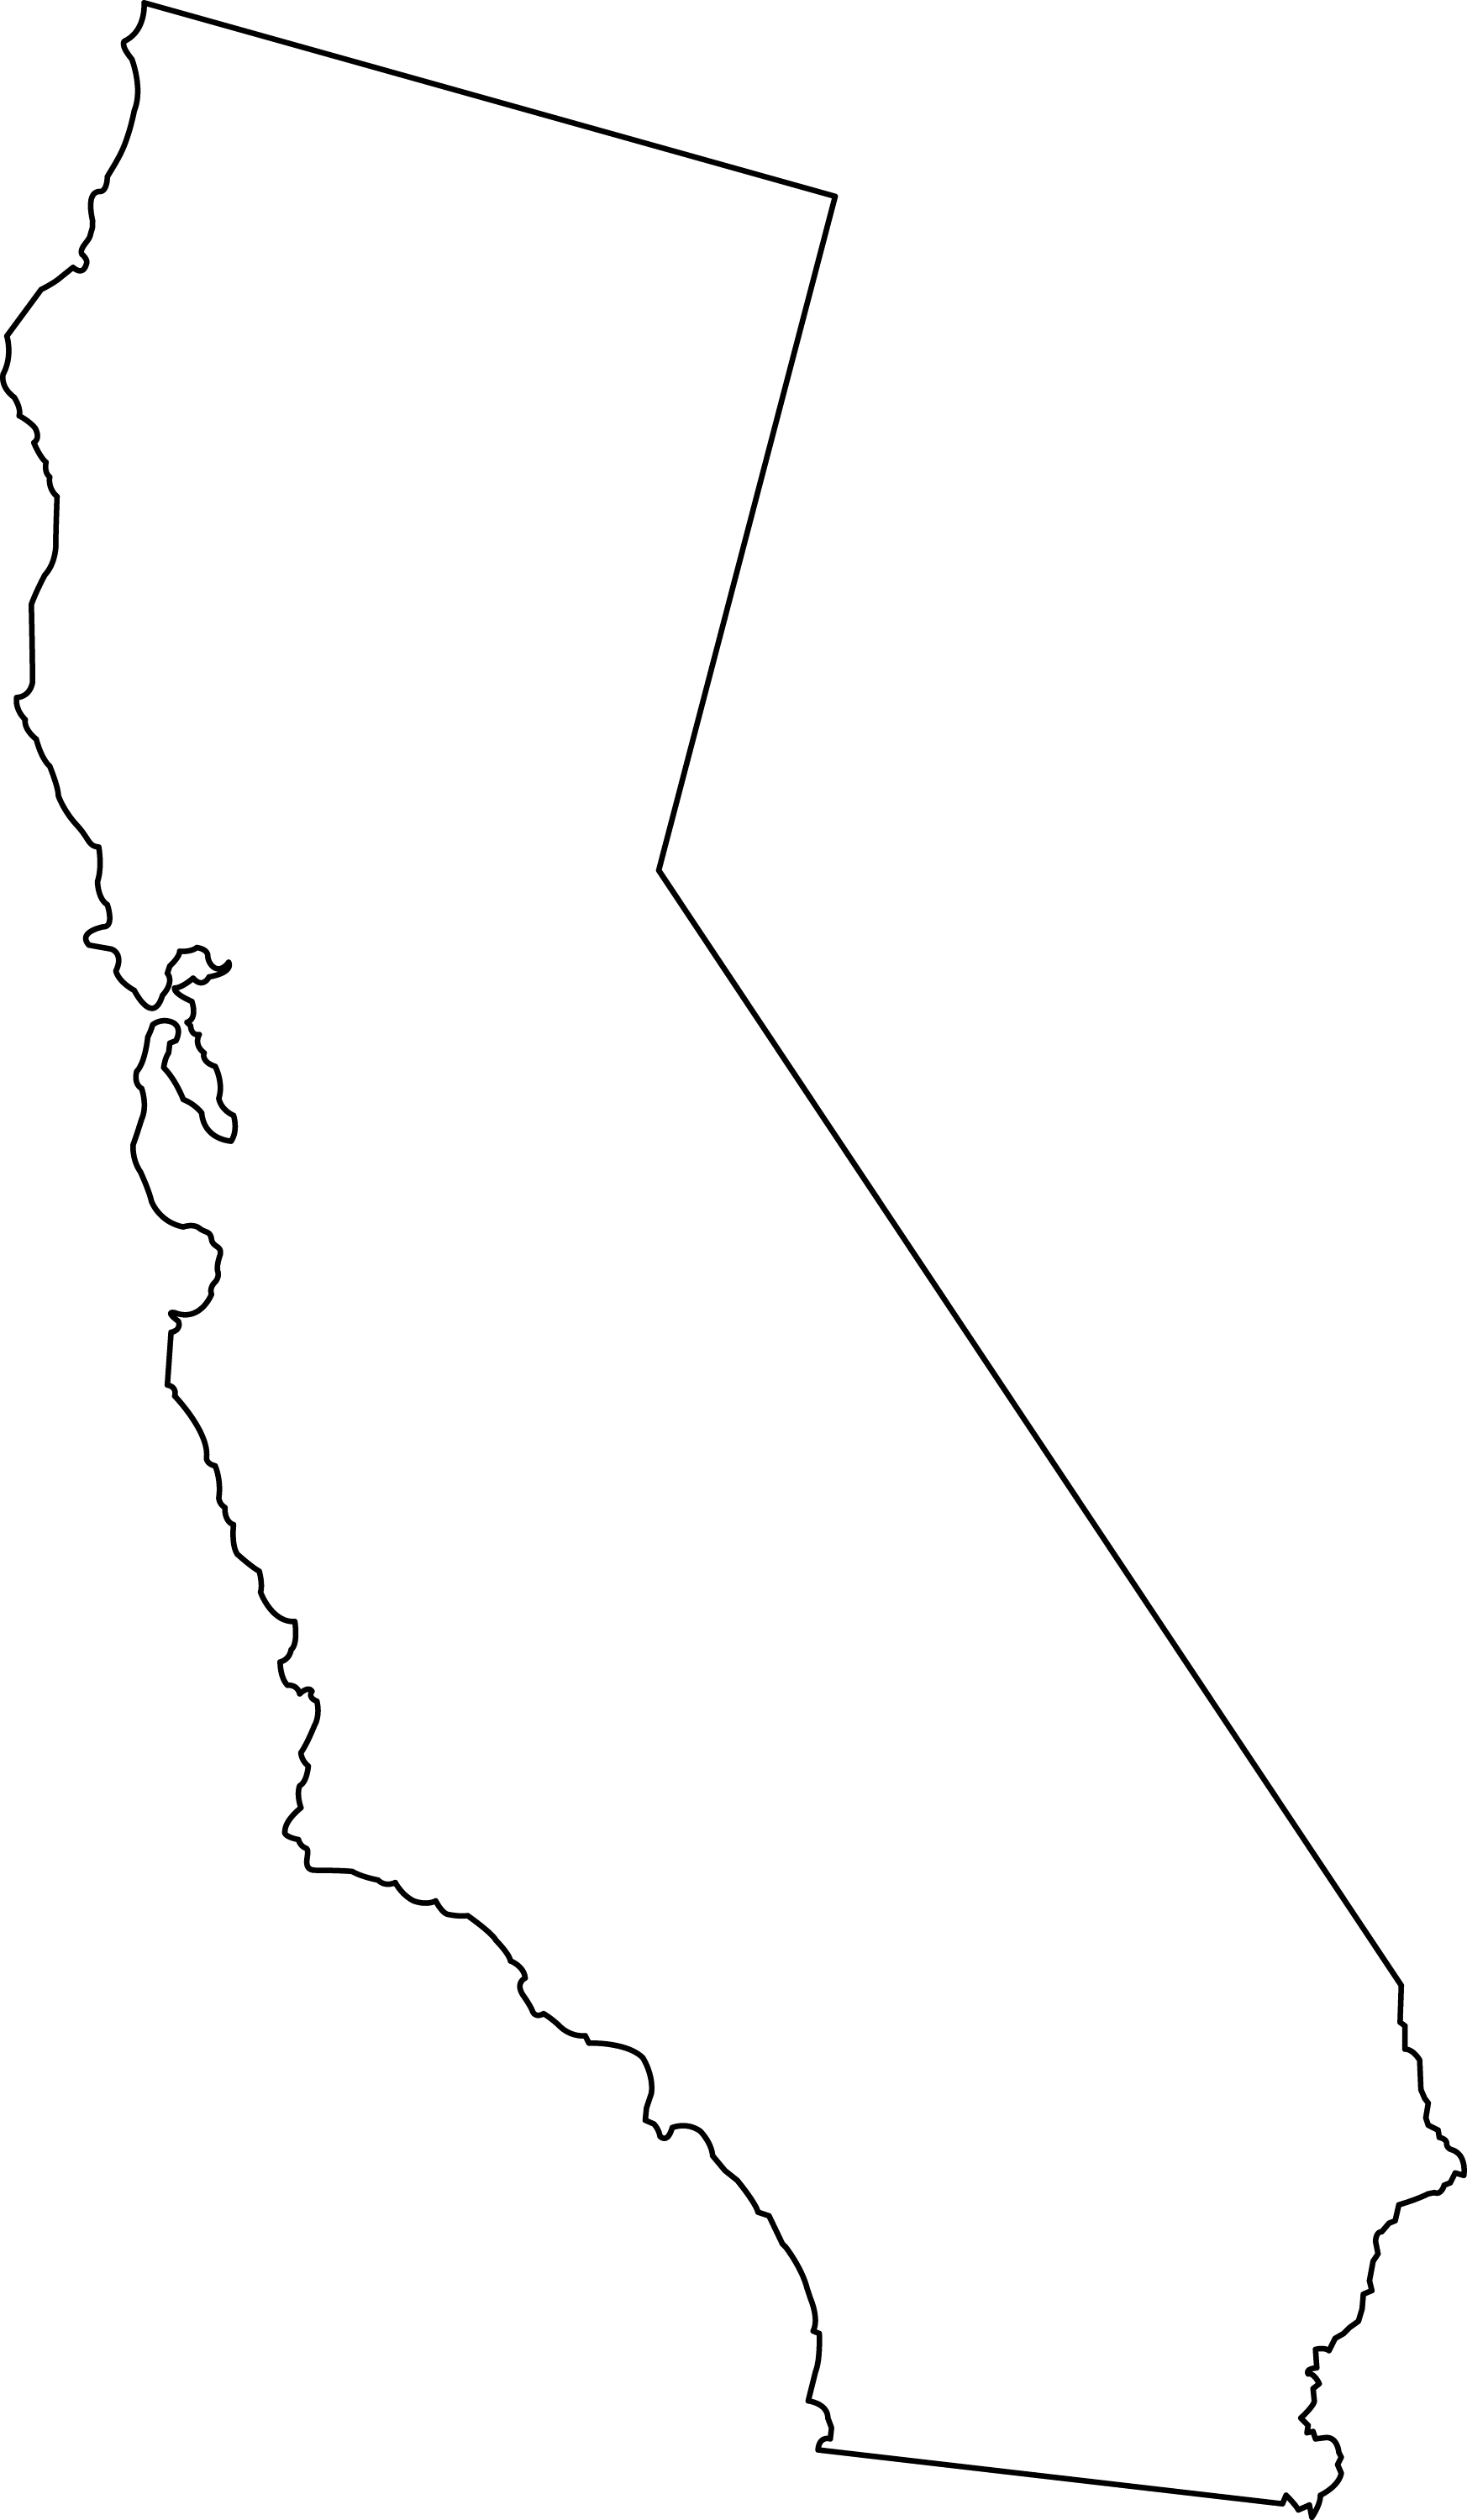 free clipart map of california - photo #13